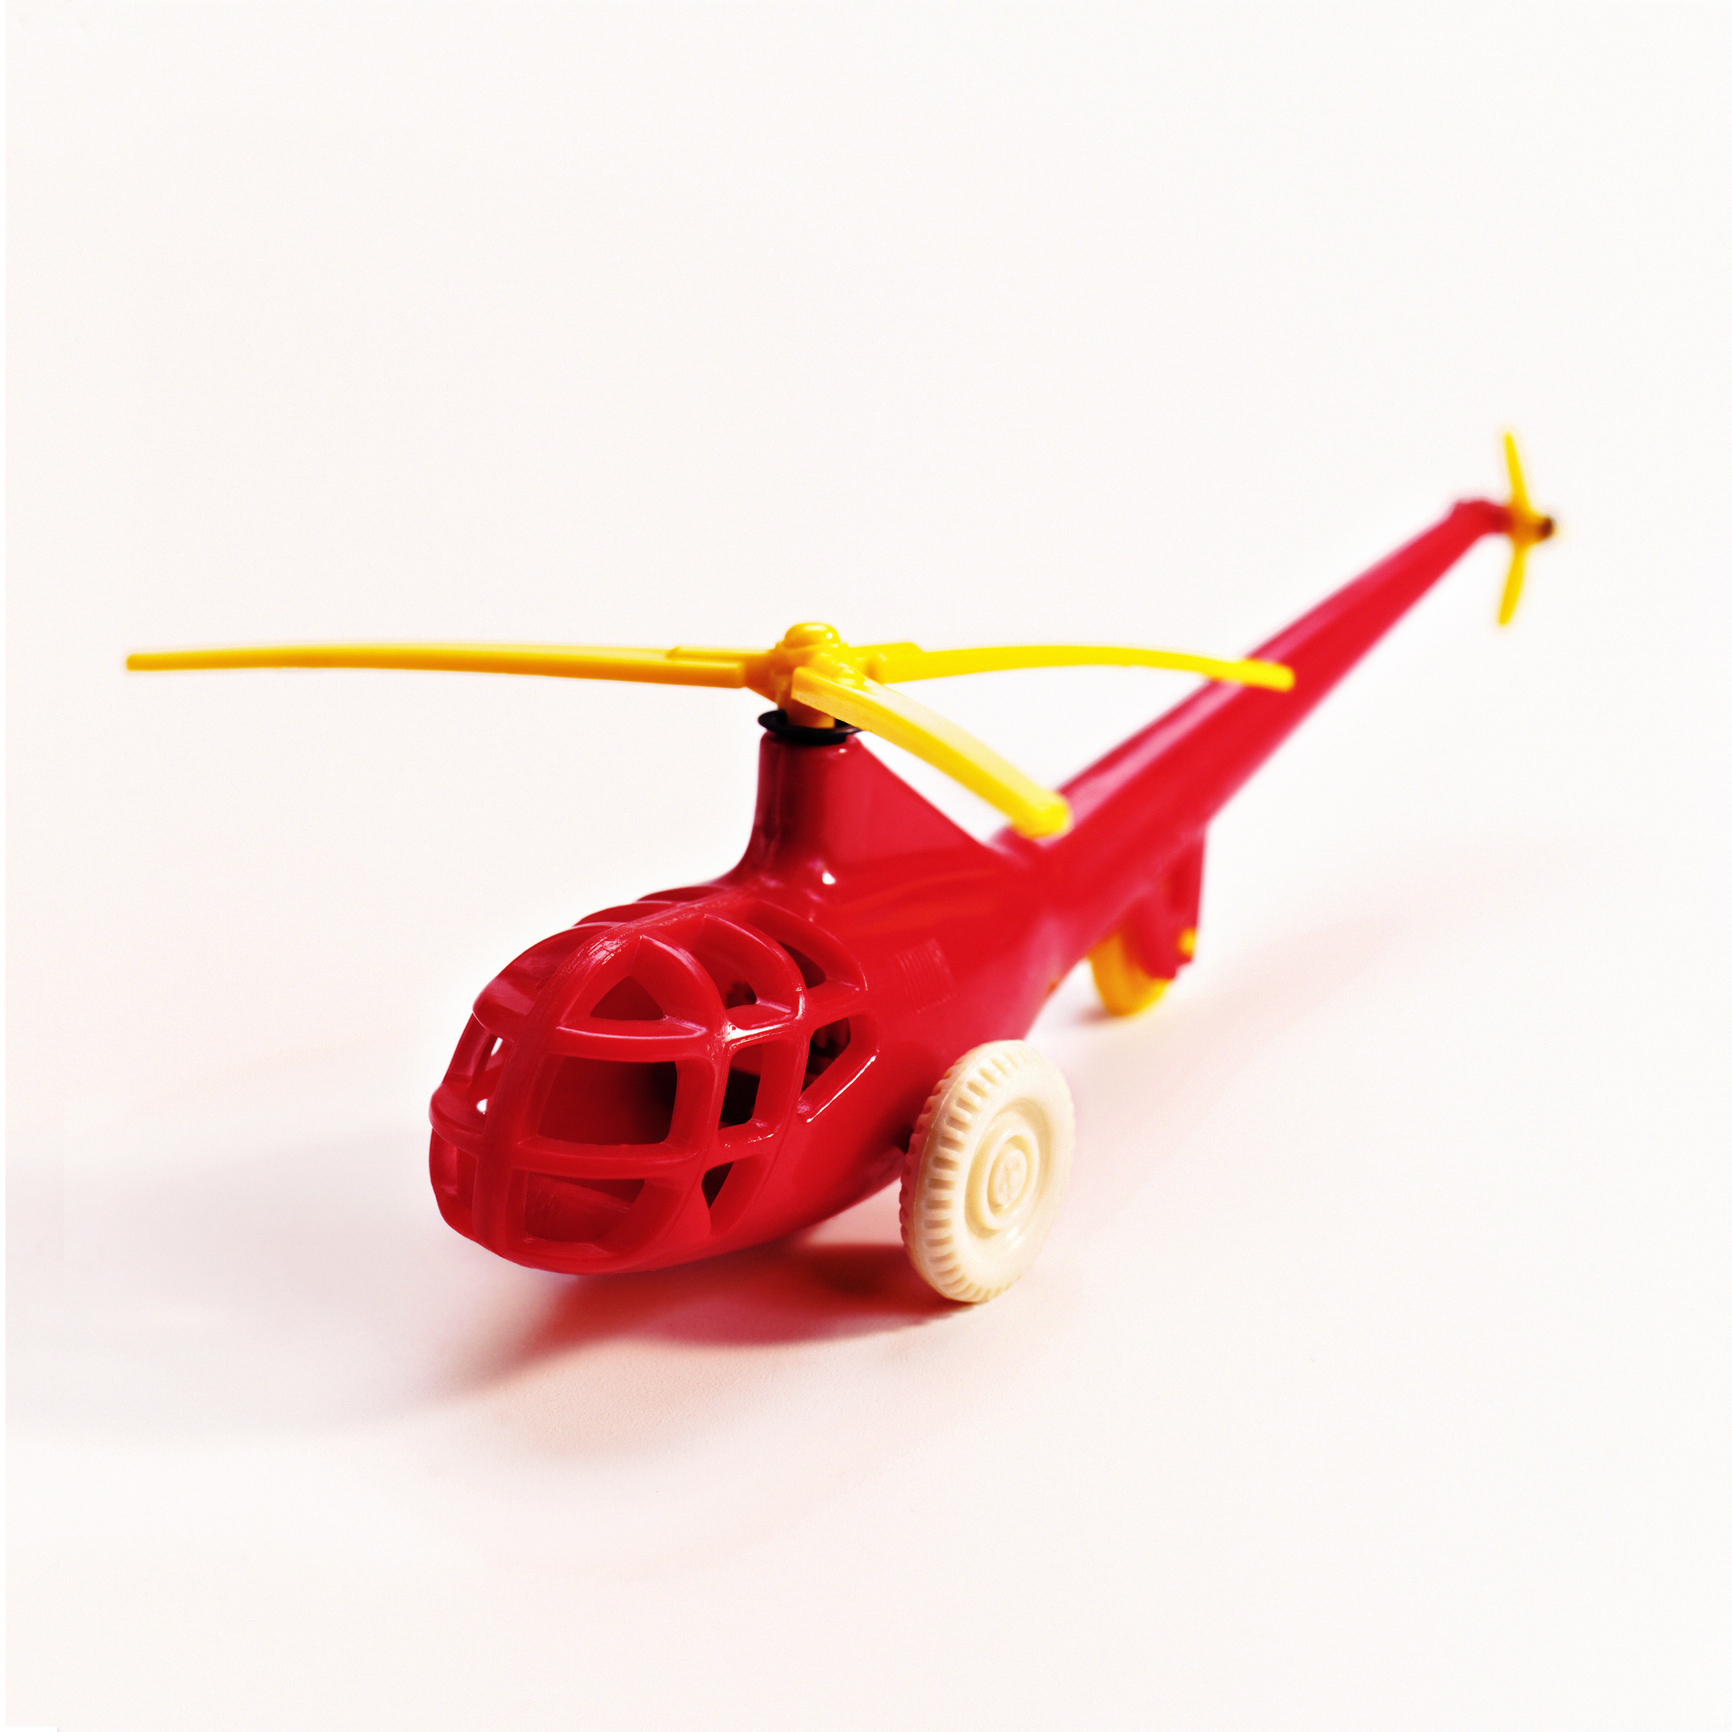 Red toy helicopter with spinning rotor blades and wheels against a white background